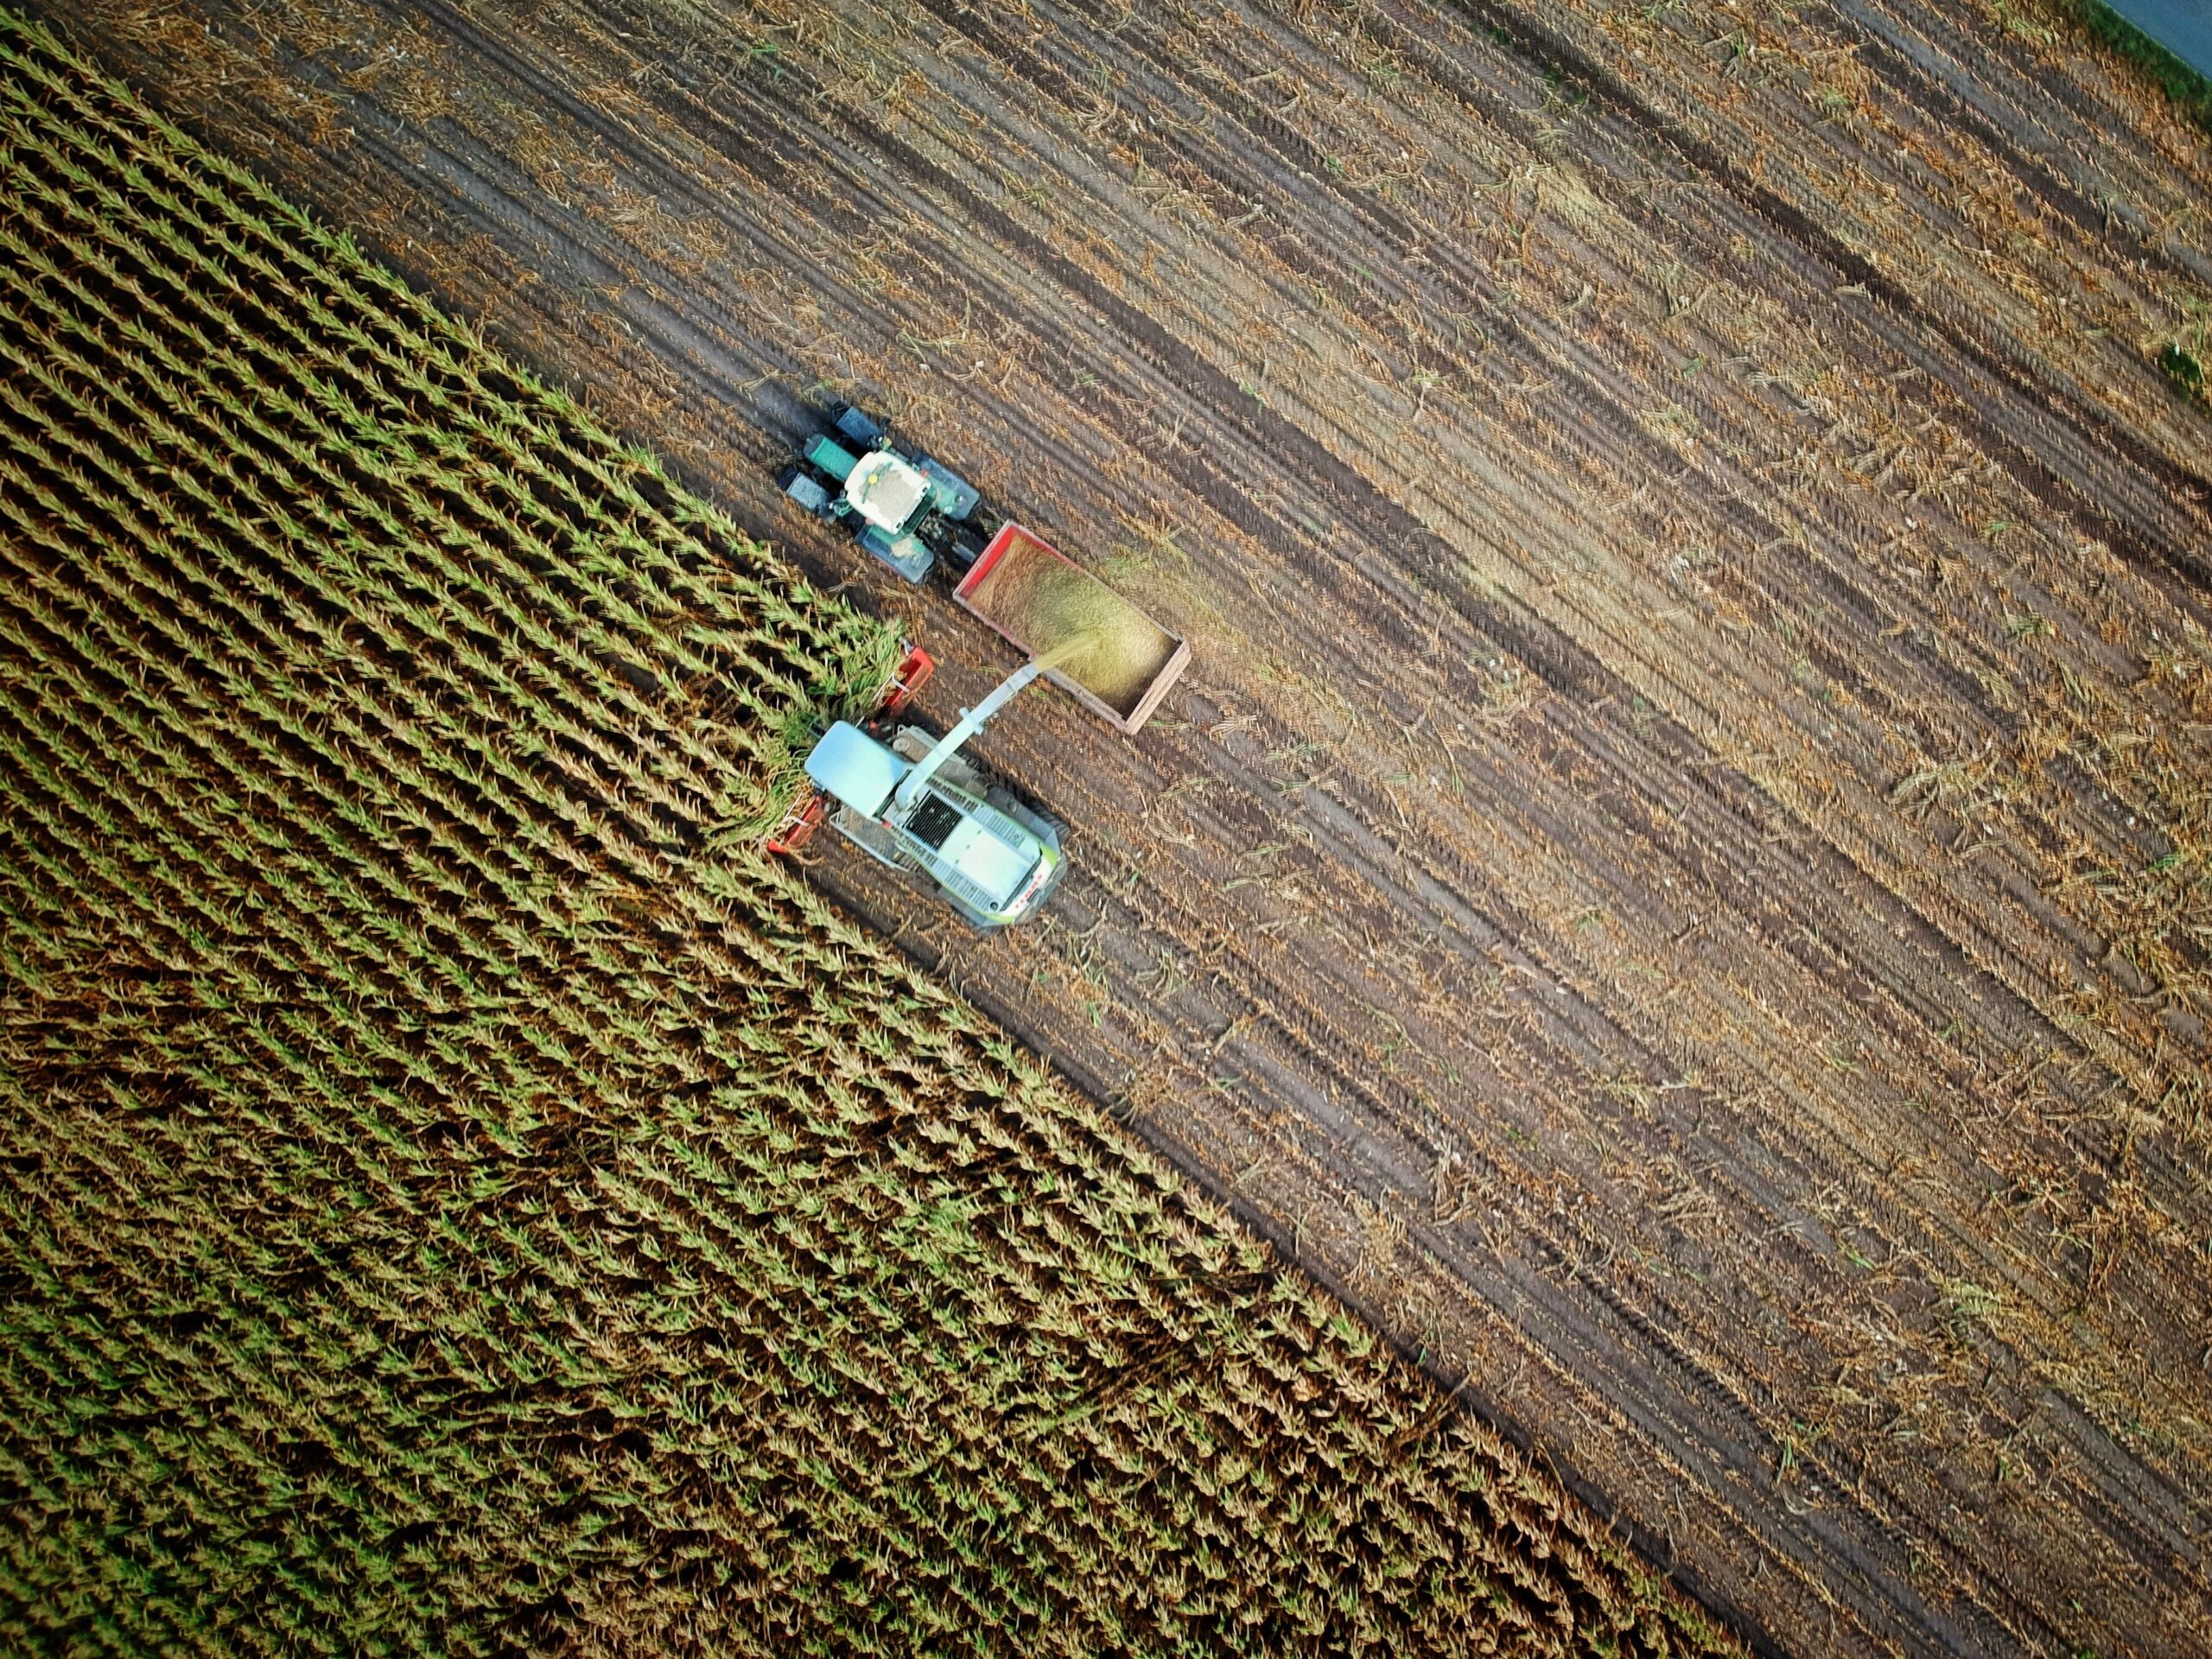 Top View of a Farmer On a Tractor Harvesting